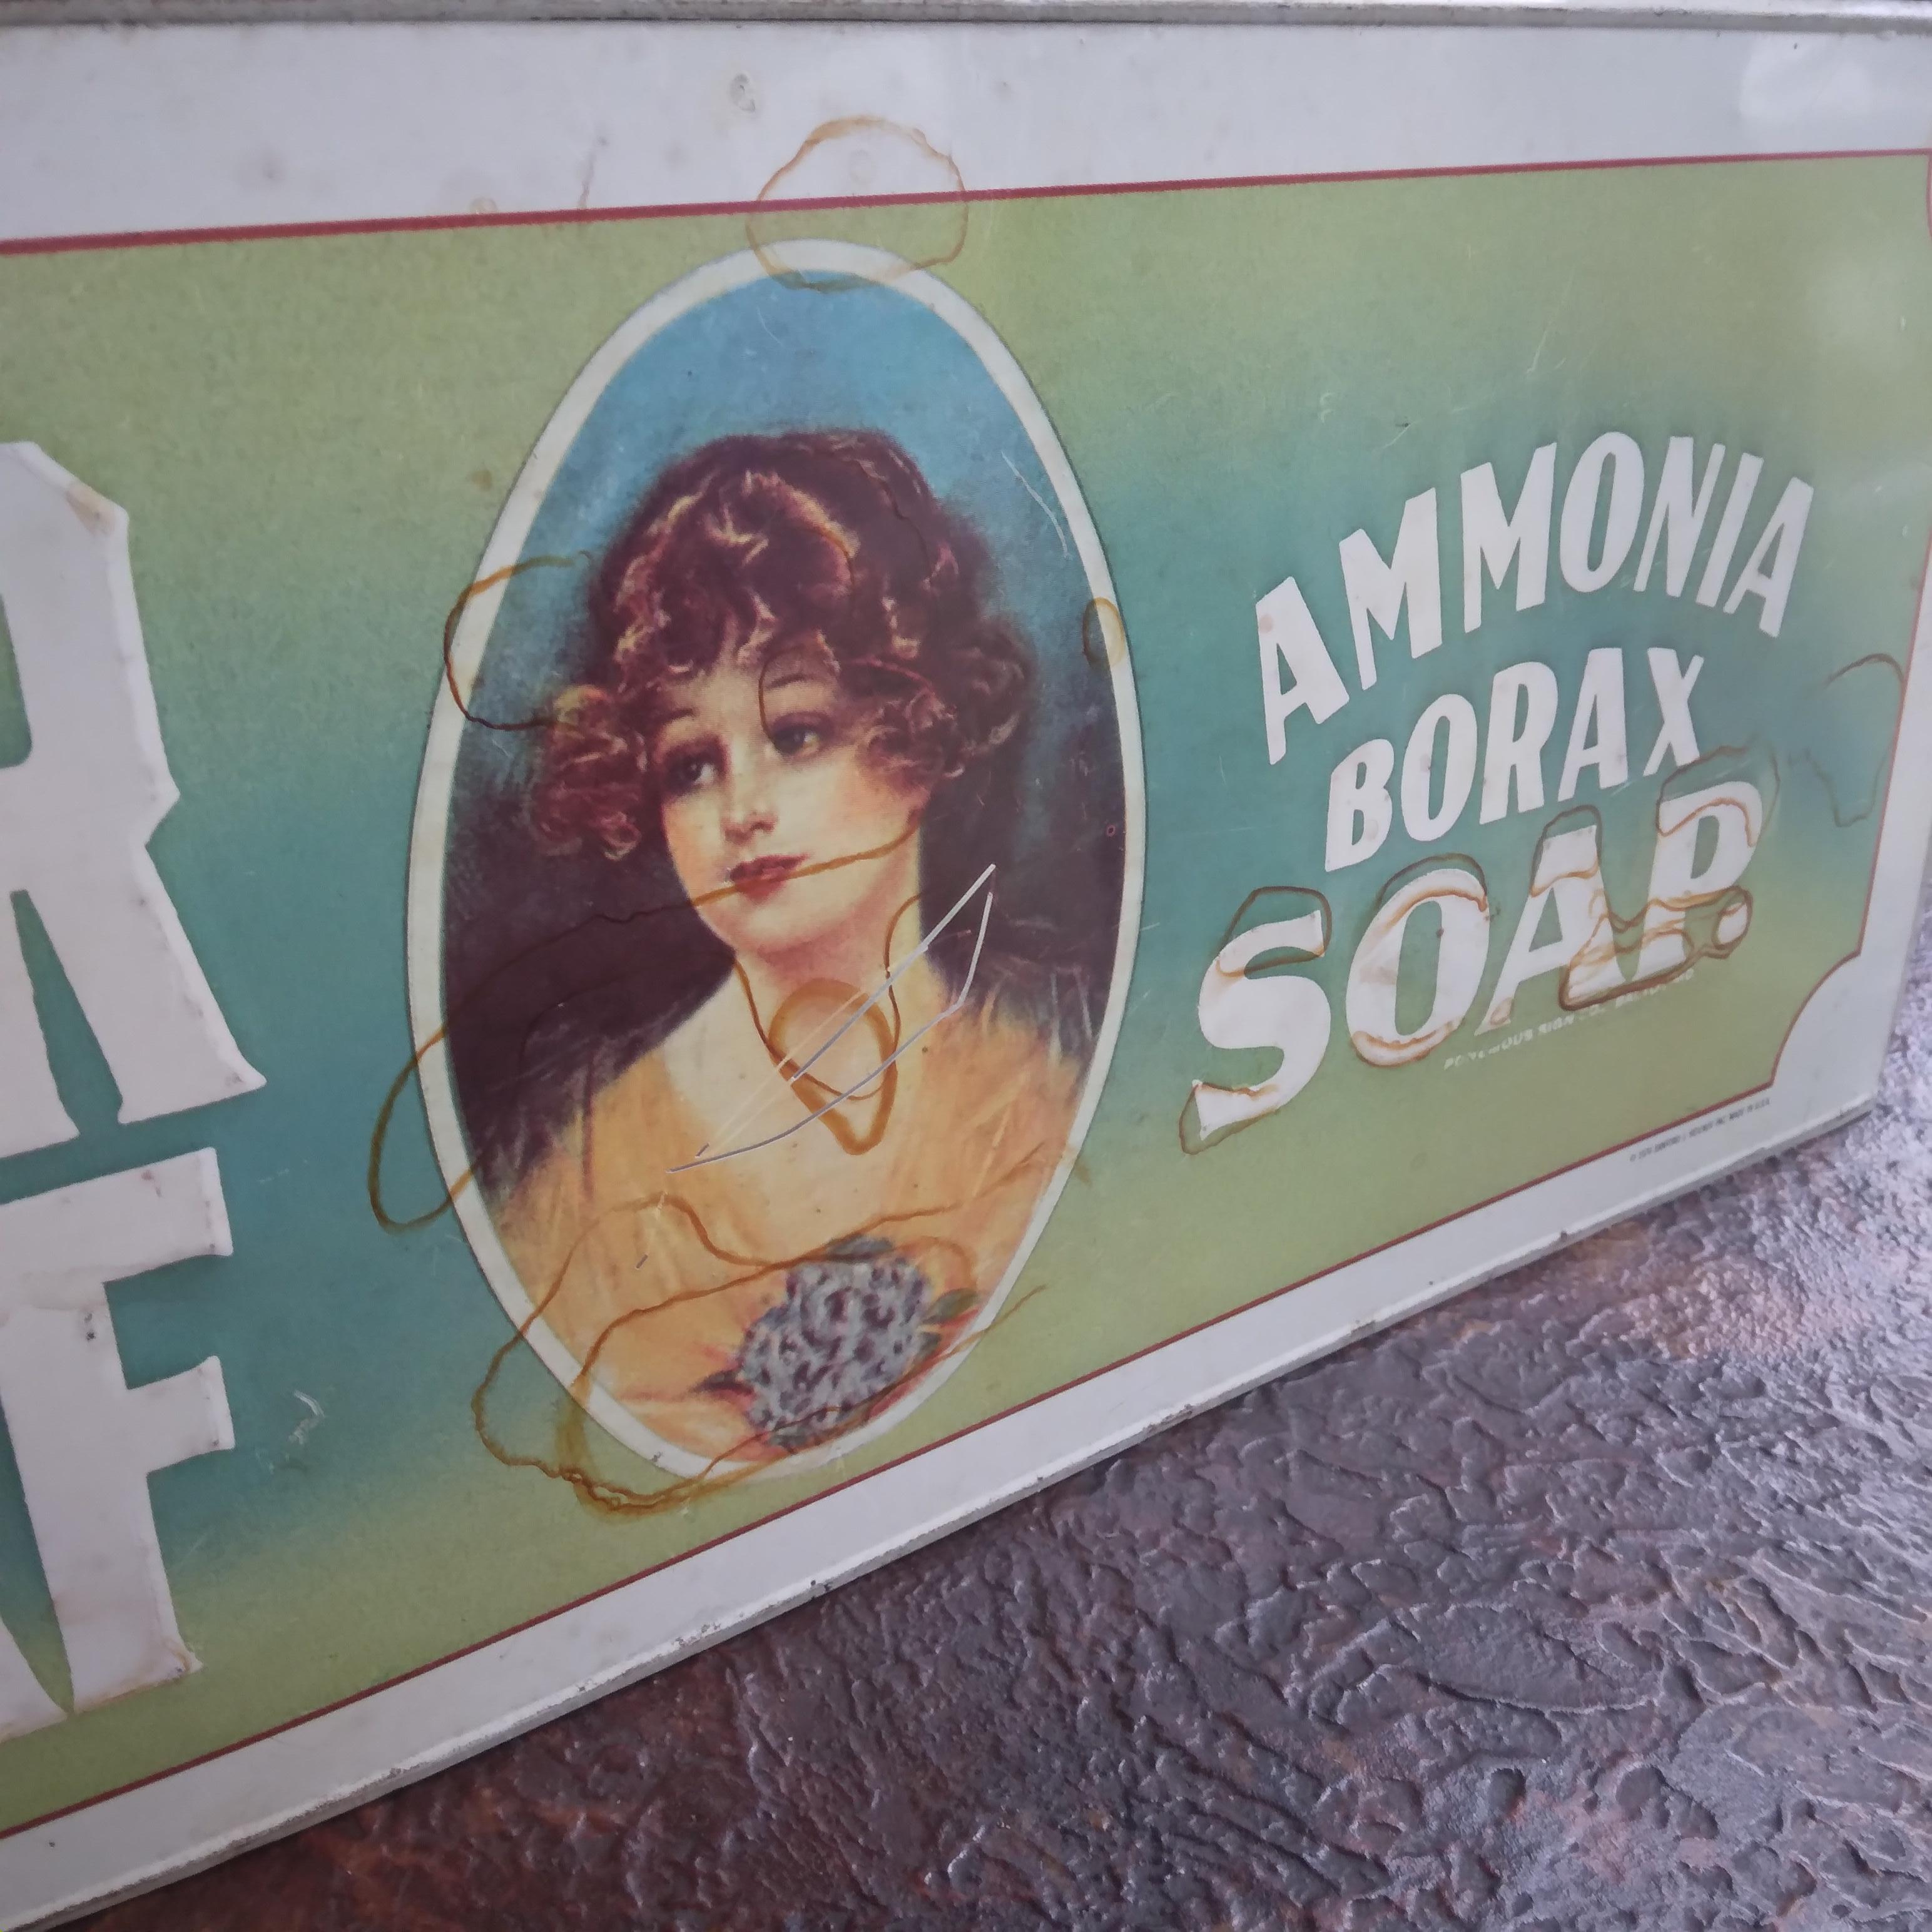 Vintage Metal Sign Clover Leaf Ammonia Borax Soap - 1974 In Distressed Condition For Sale In Munster, IN